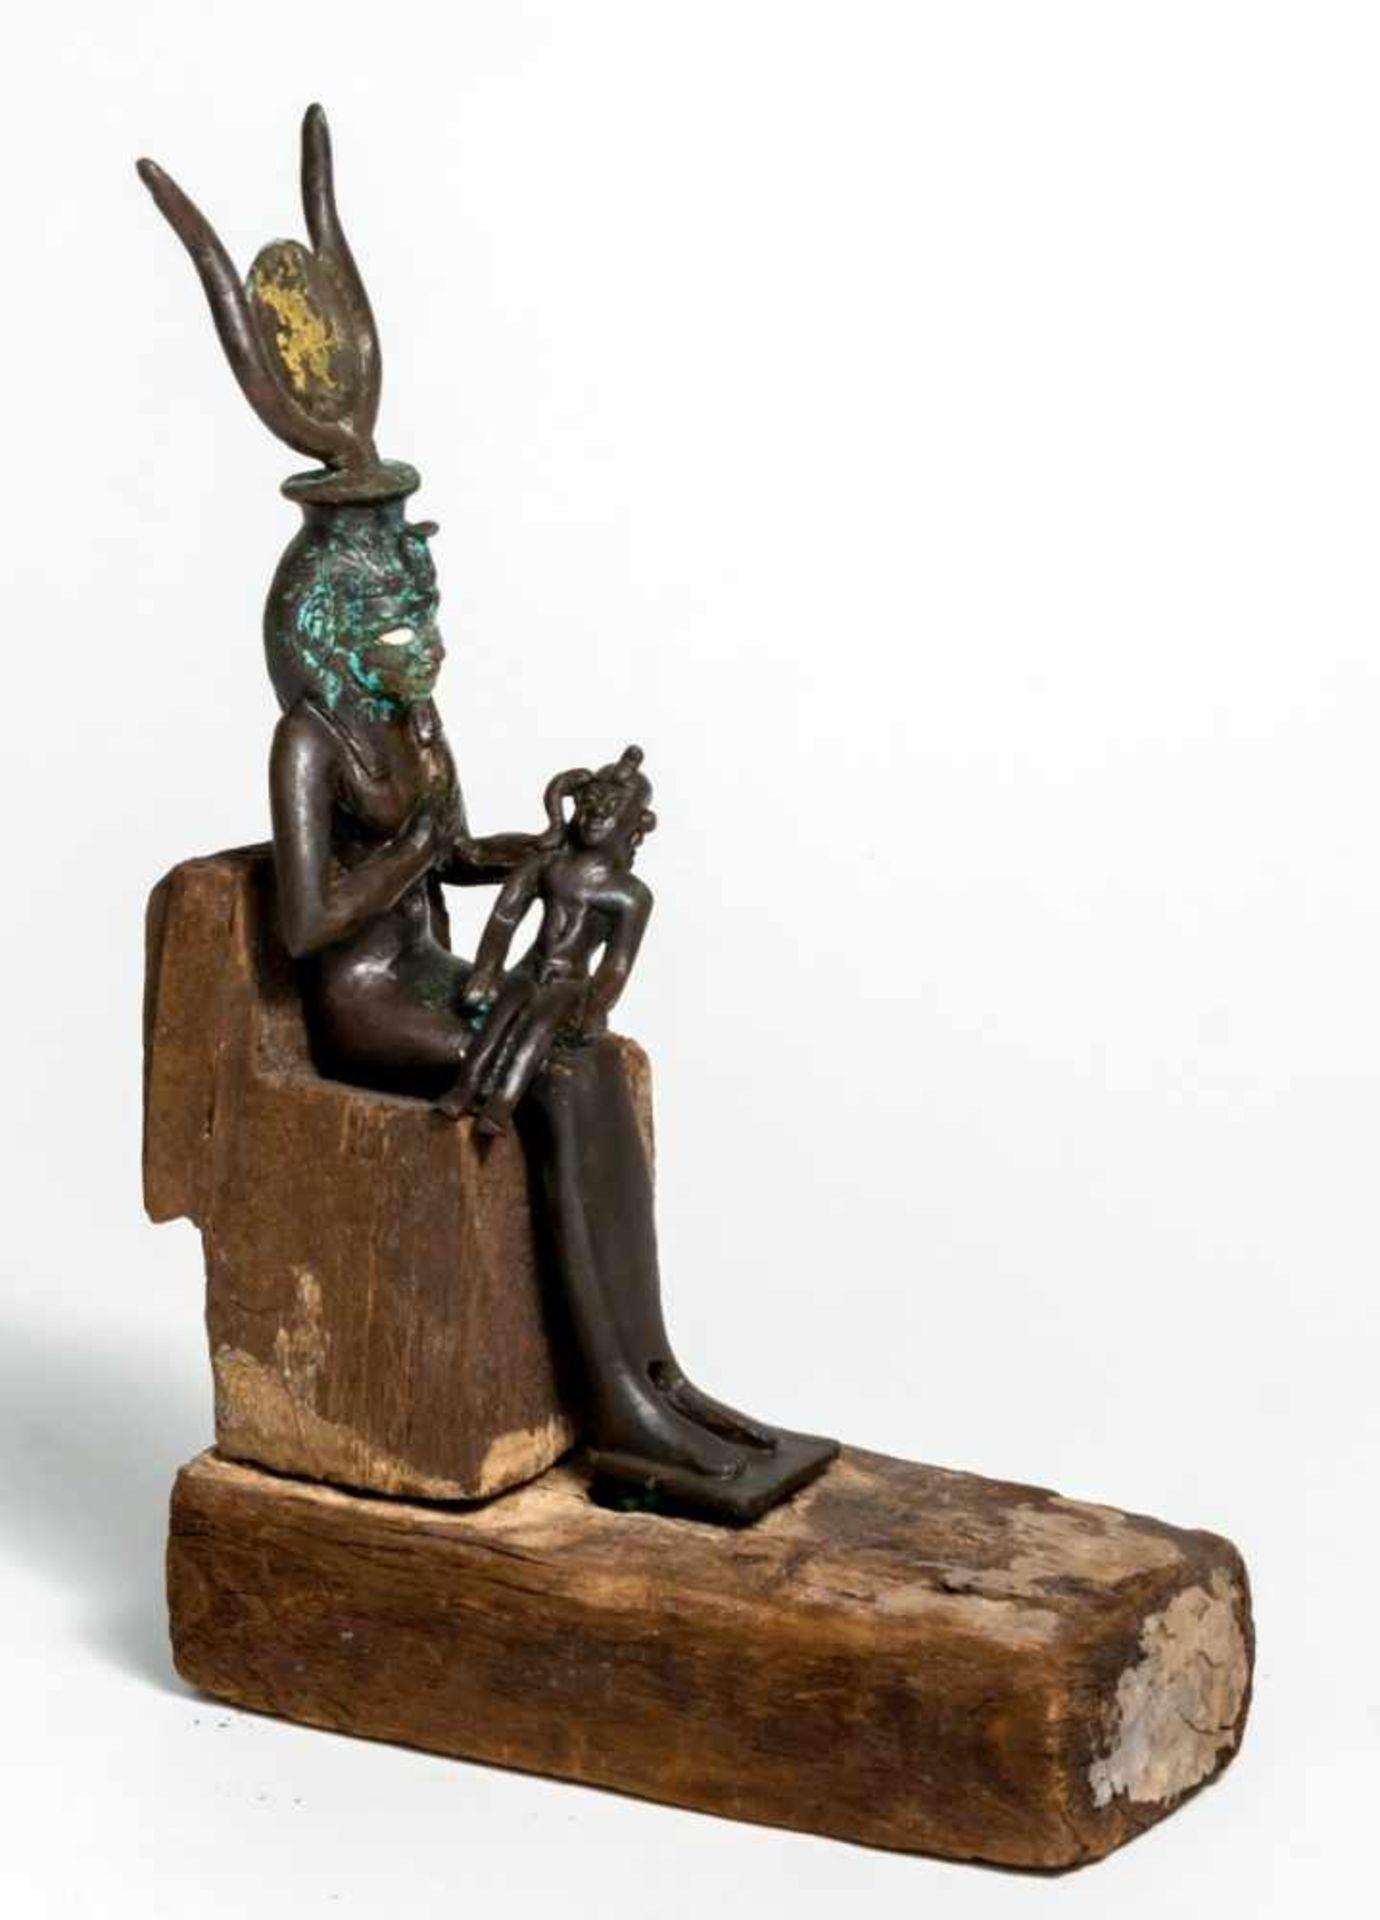 The Goddess Isis with Horus the Child, Egypt, Late period, around 600 B.C.,